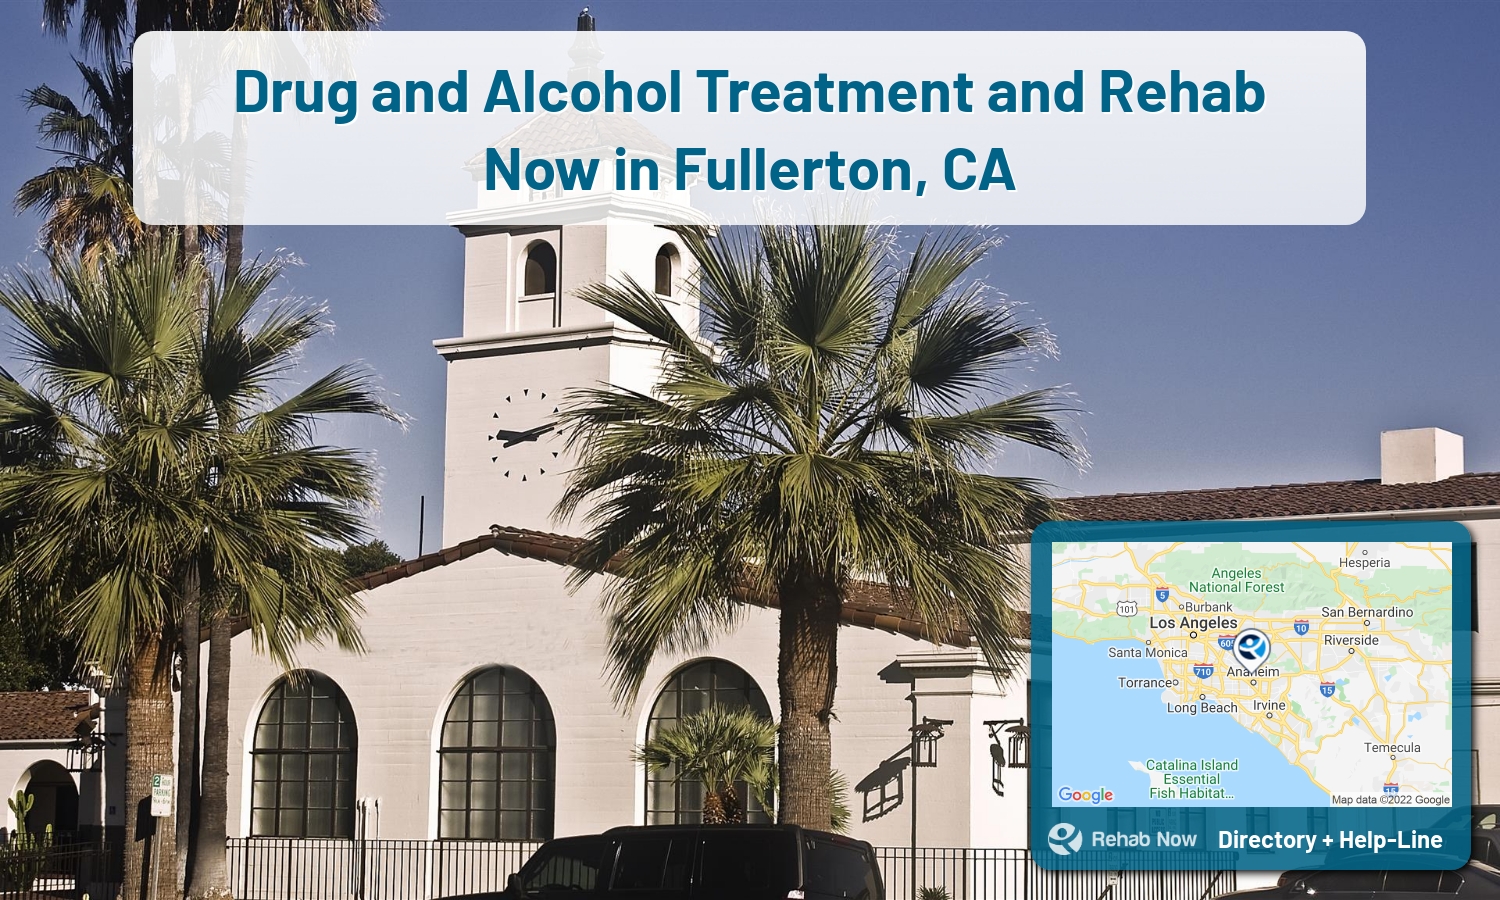 Fullerton, CA Treatment Centers. Find drug rehab in Fullerton, California, or detox and treatment programs. Get the right help now!